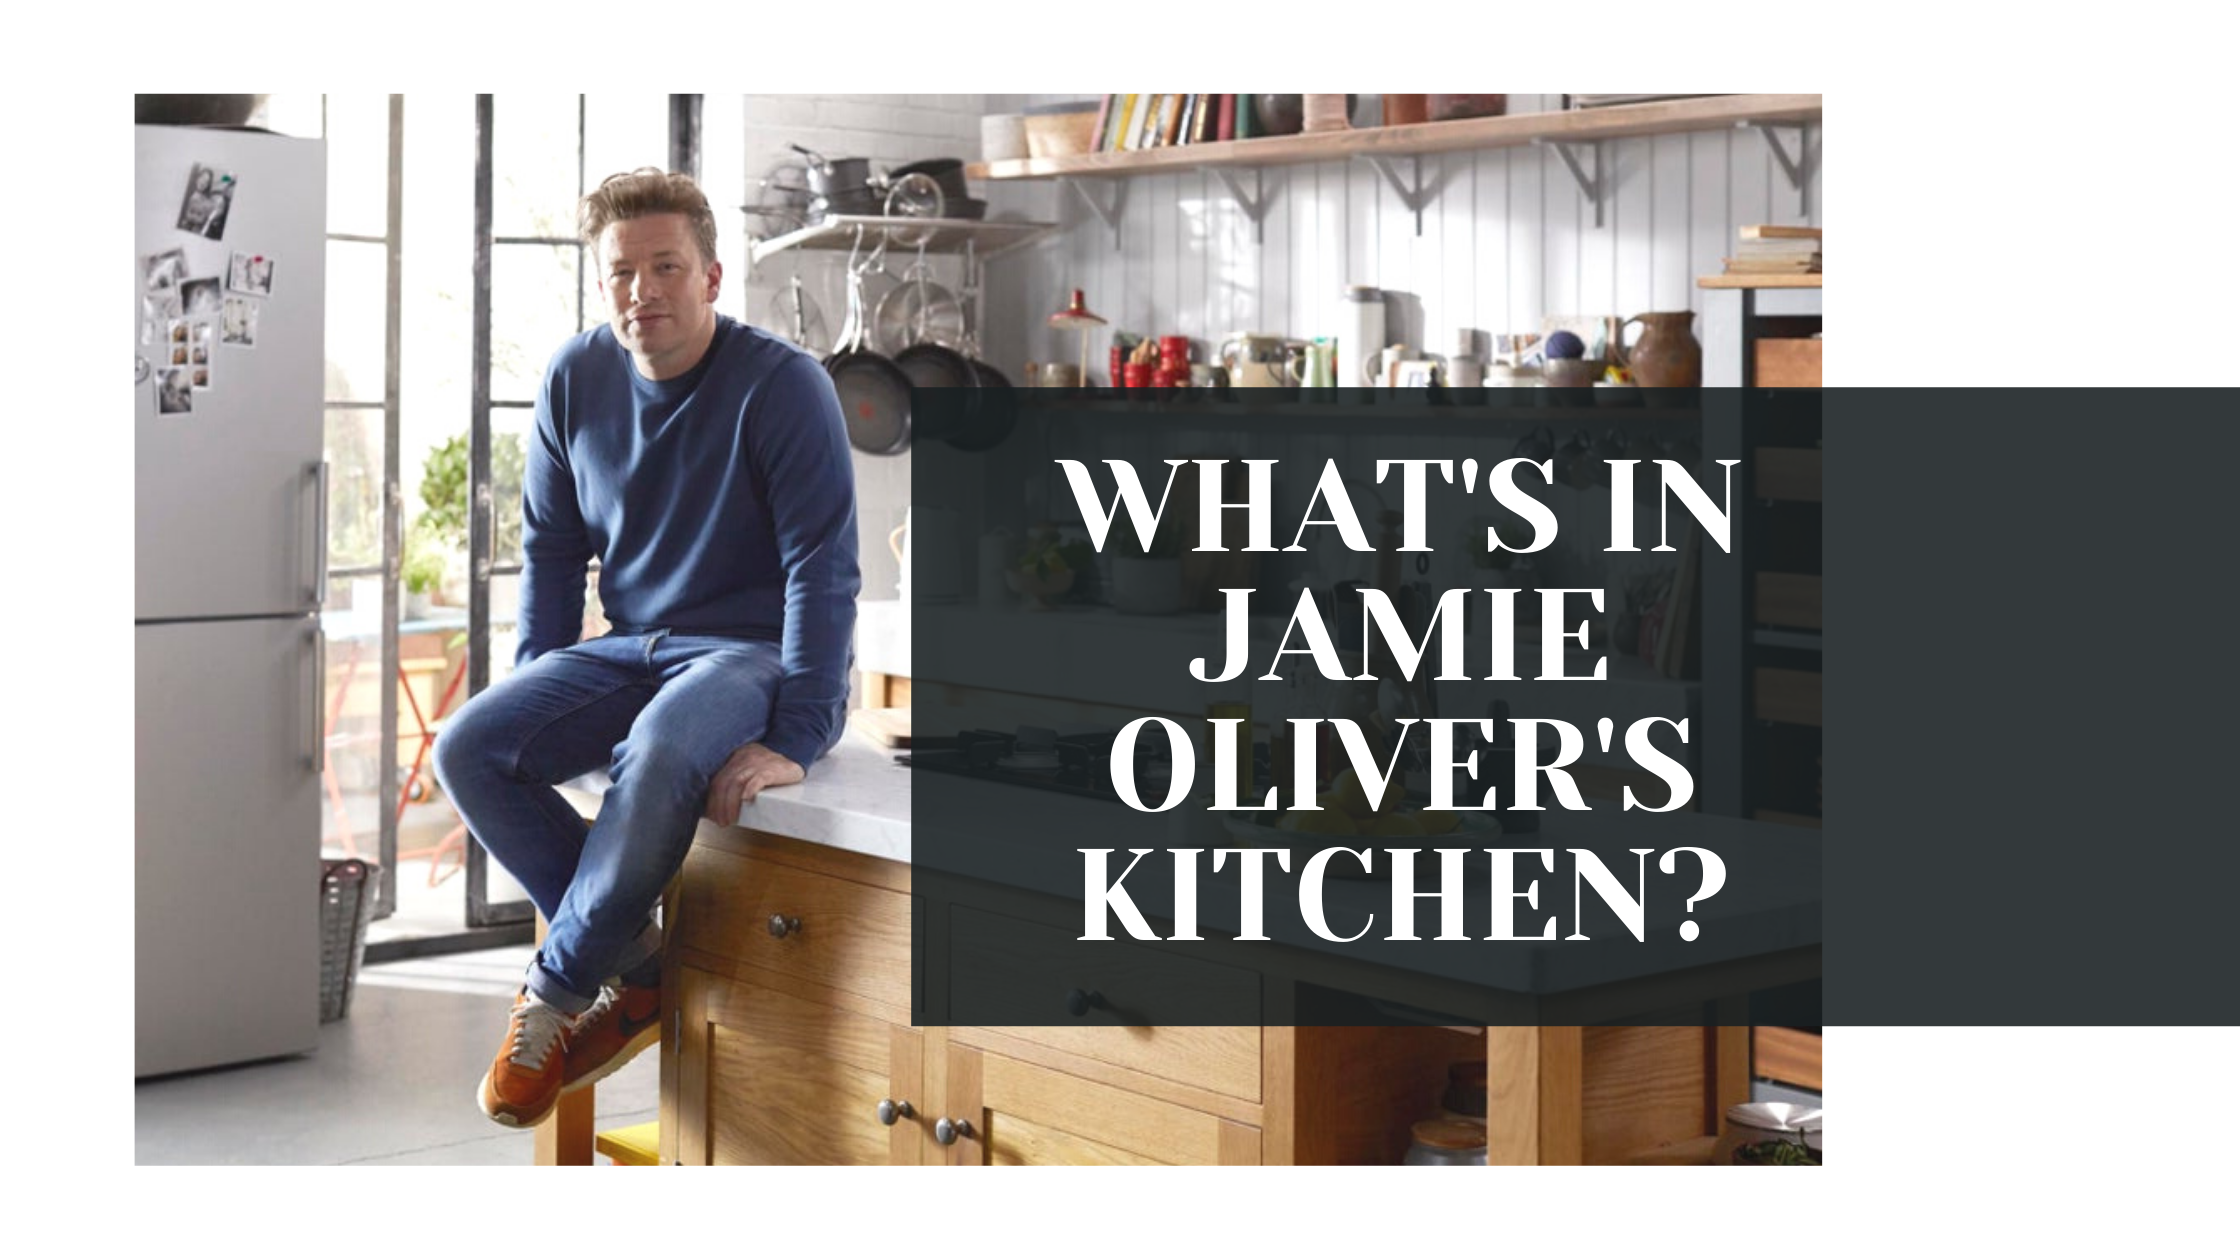 Jamie Oliver sitting on his home Kitchen counter.